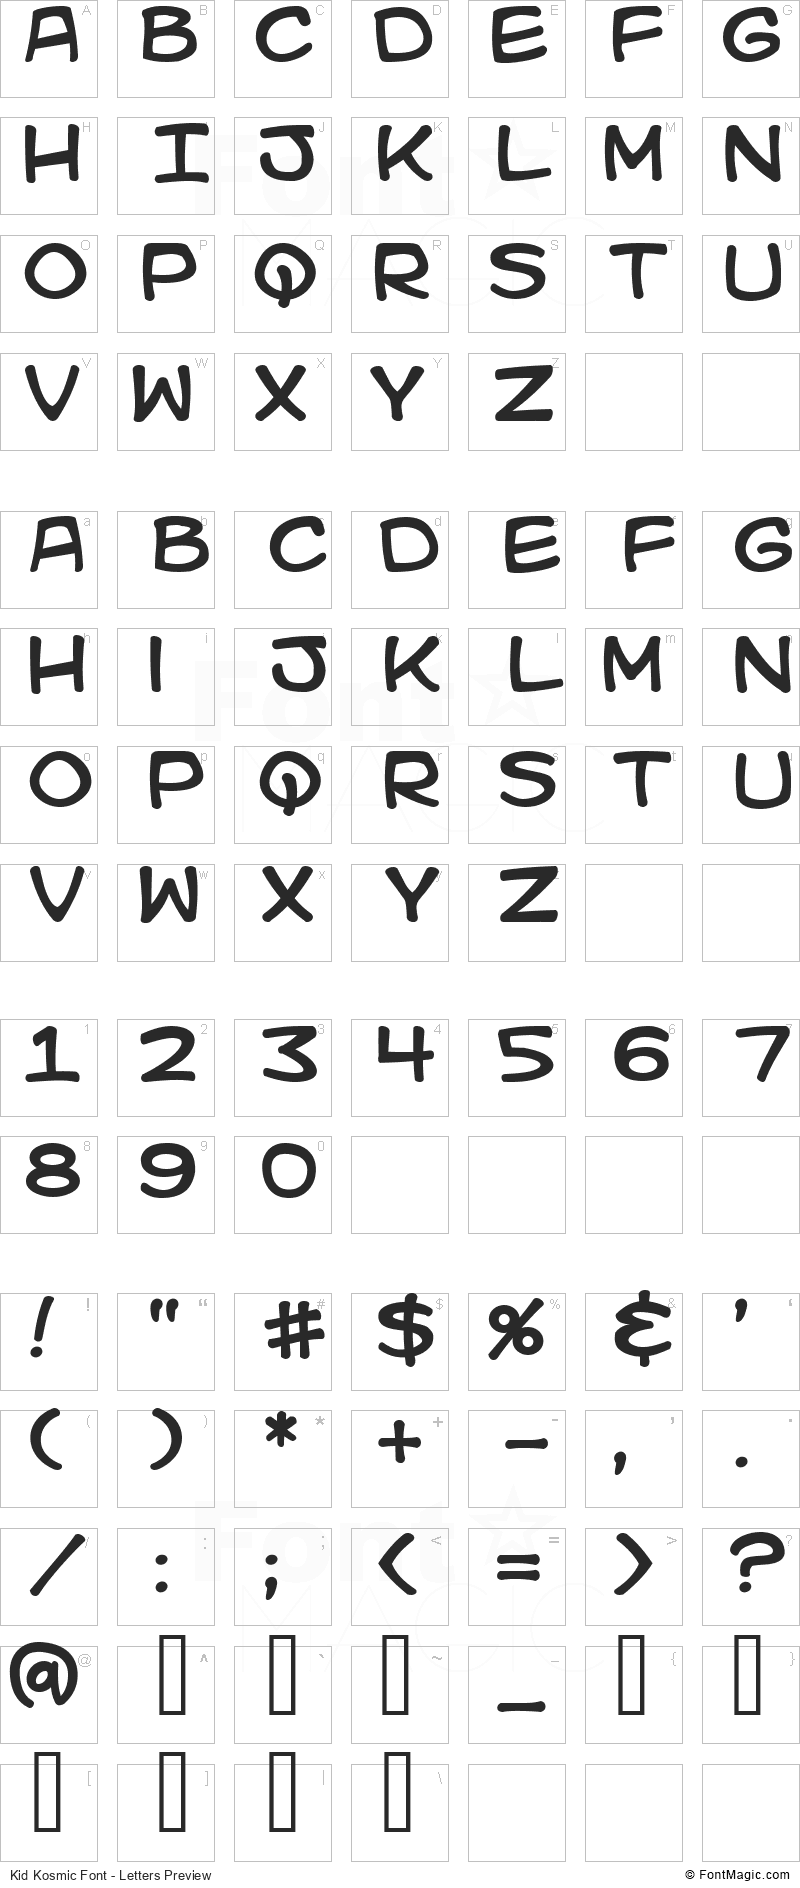 Kid Kosmic Font - All Latters Preview Chart